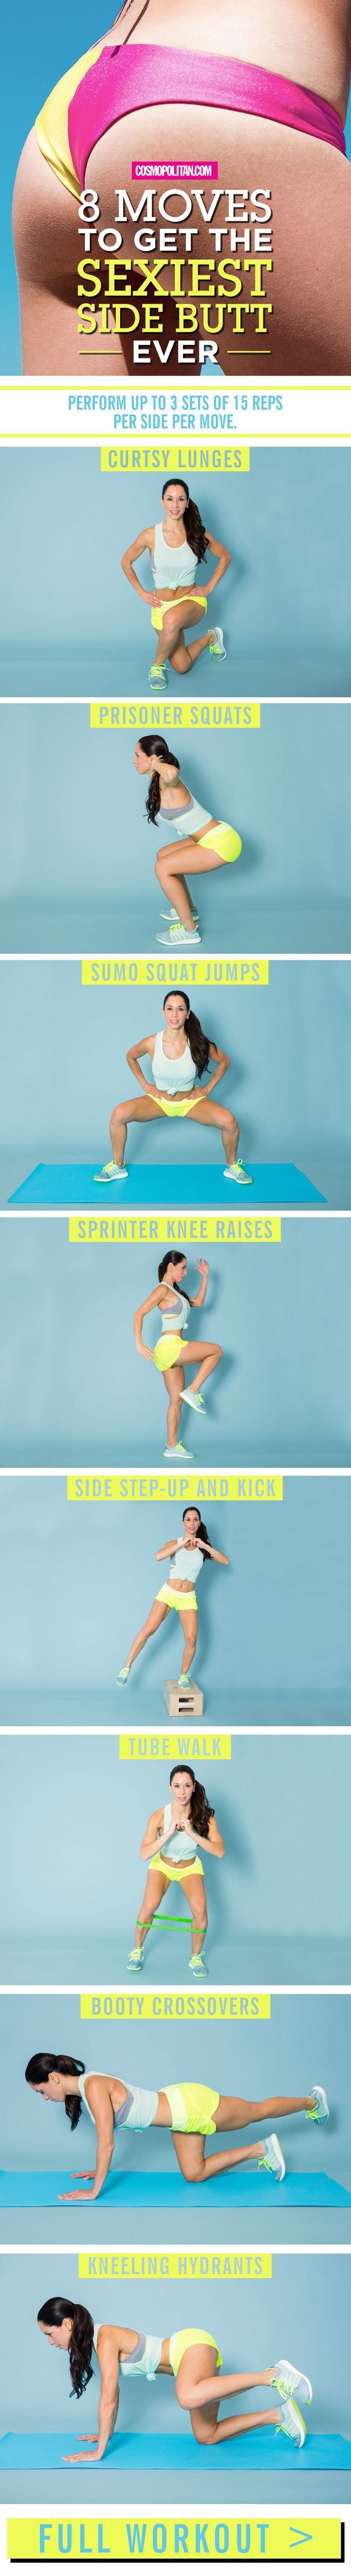 8 Moves to Get the Sexiest Side Butt Ever